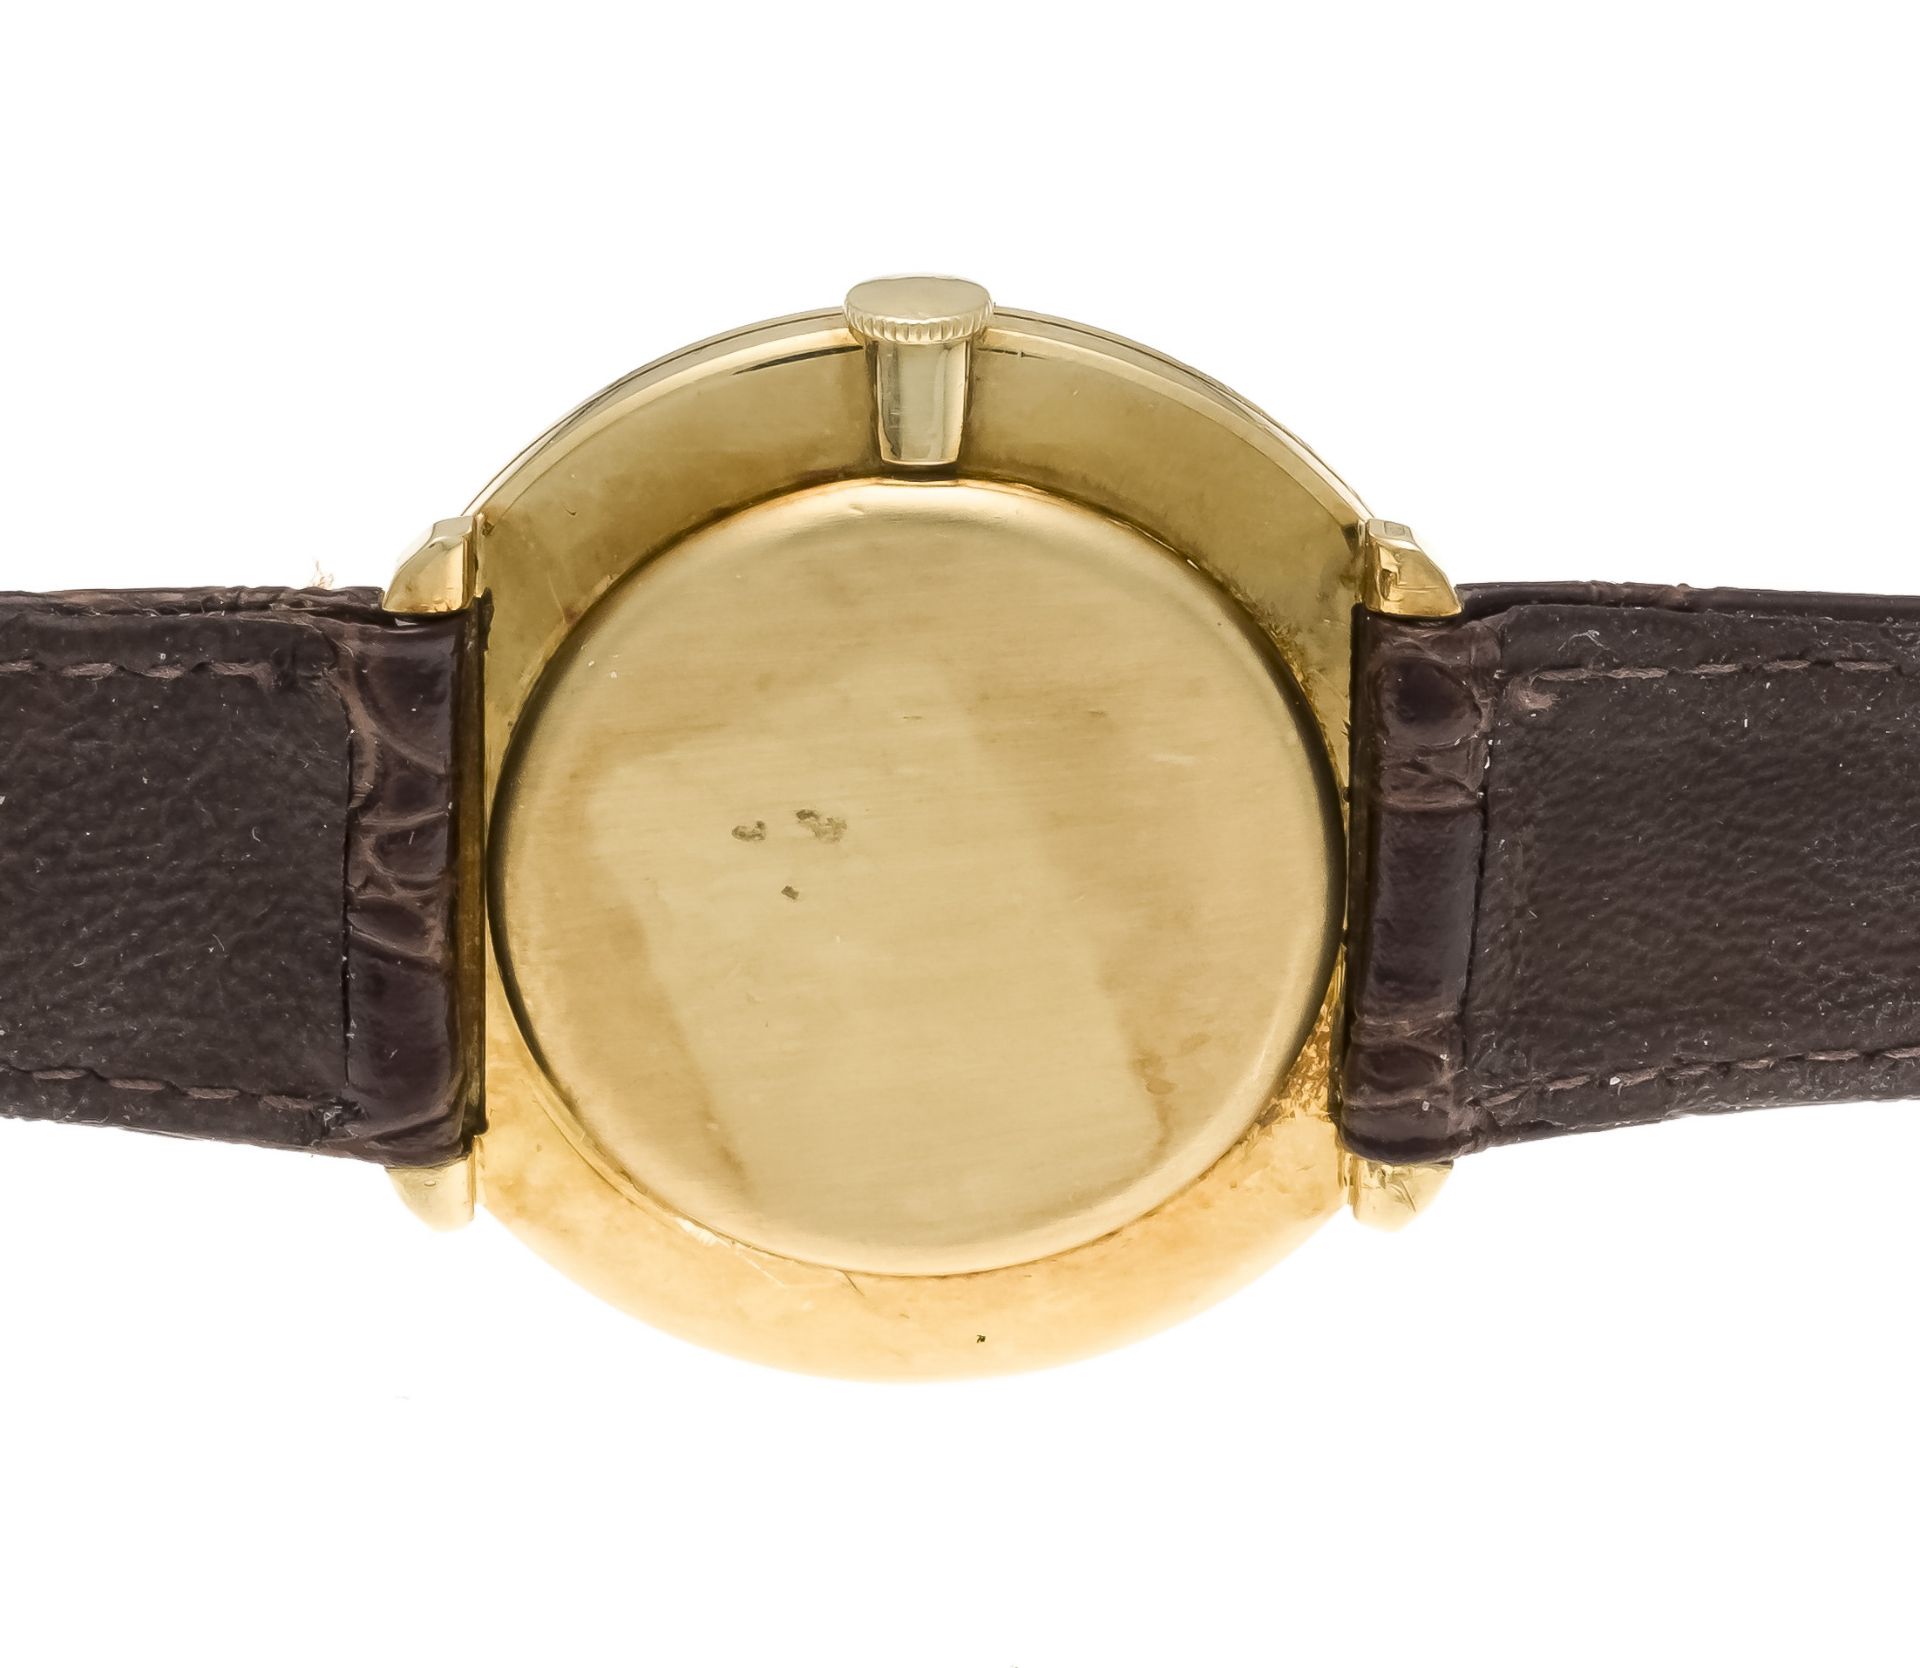 IWC International Watch Company, 750/000GG, Ref. 1210 circa 1960, polished case, push back with line - Image 2 of 2